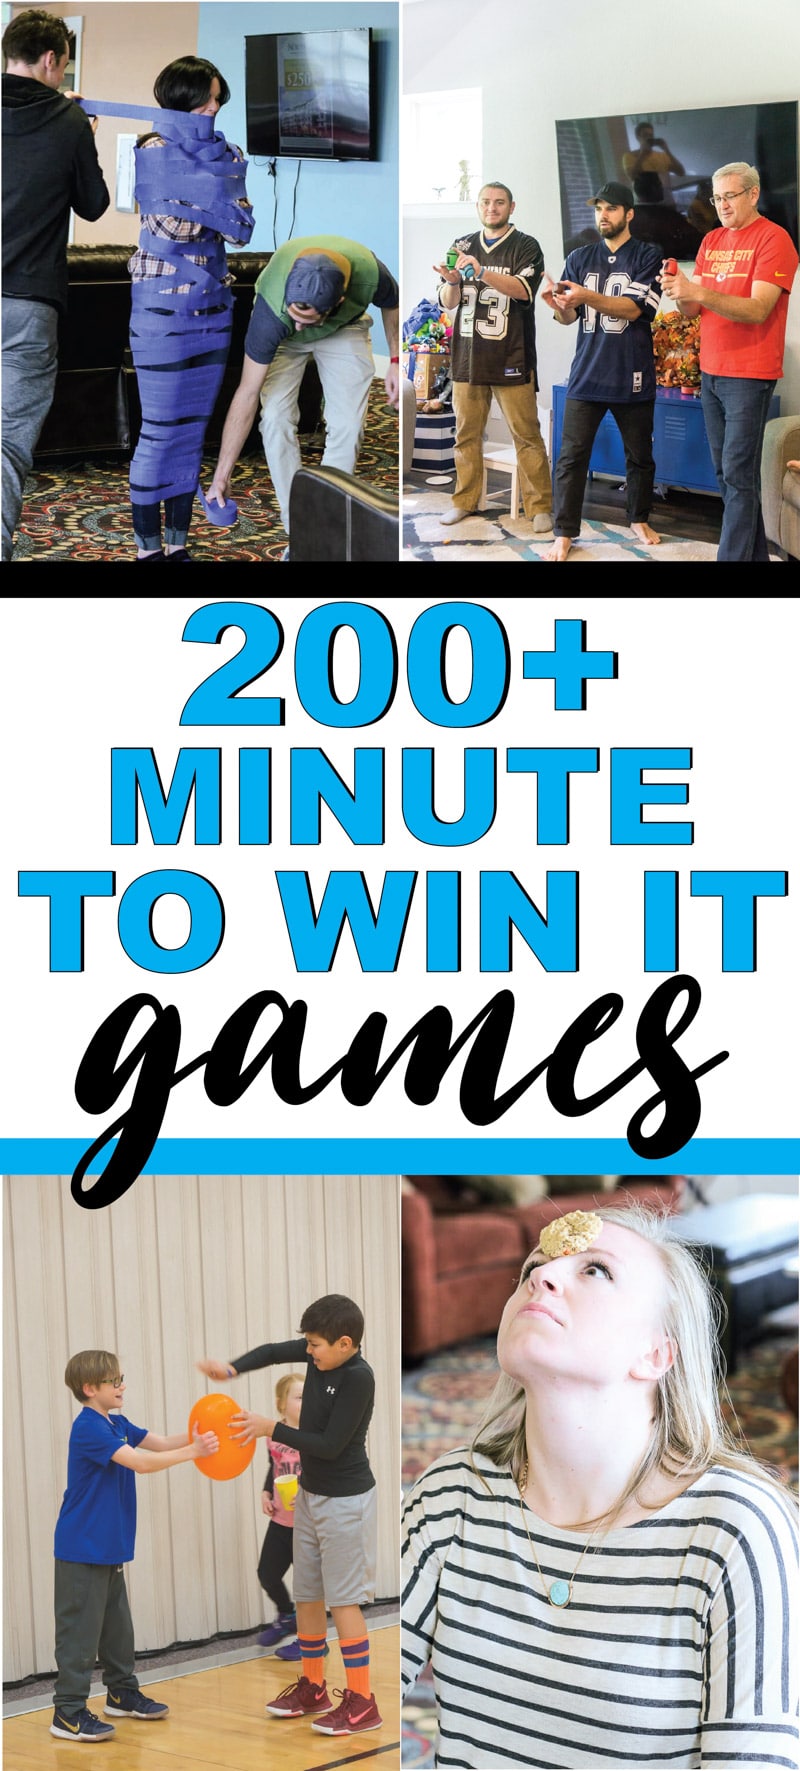 10 Games ideas  games, game guide, free games